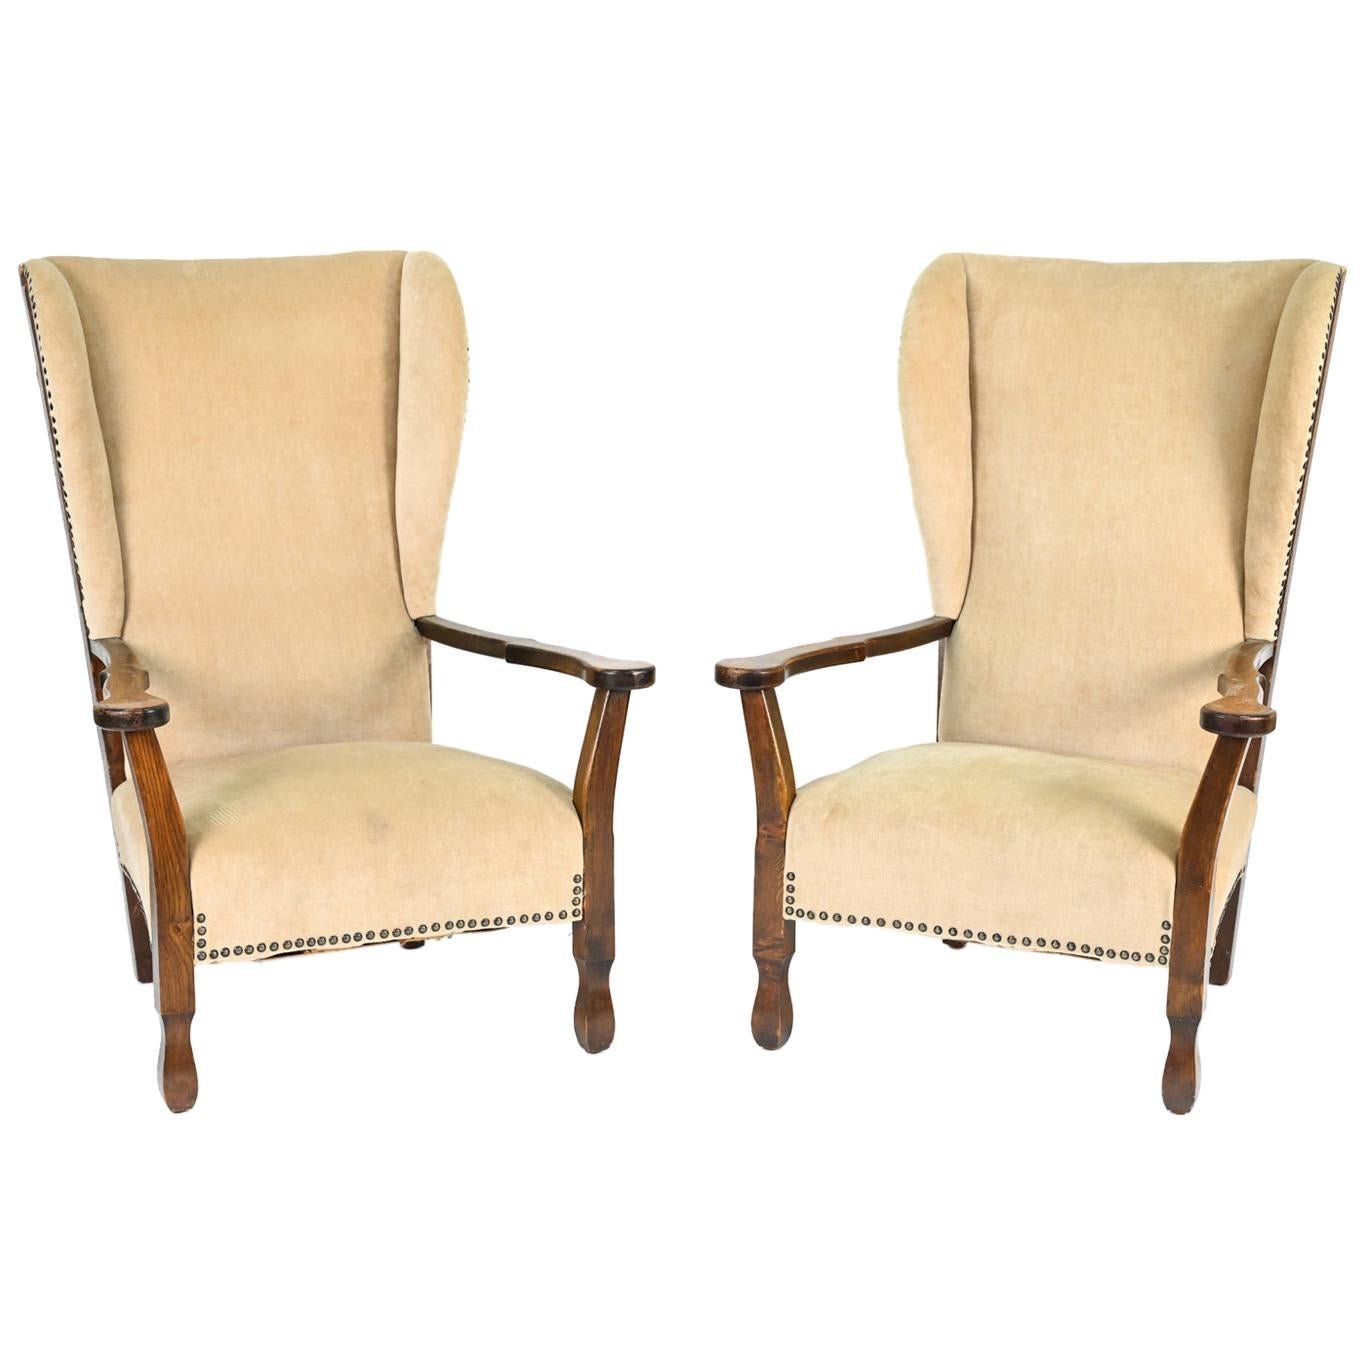 Pair of 1940's Oak Highback Chairs